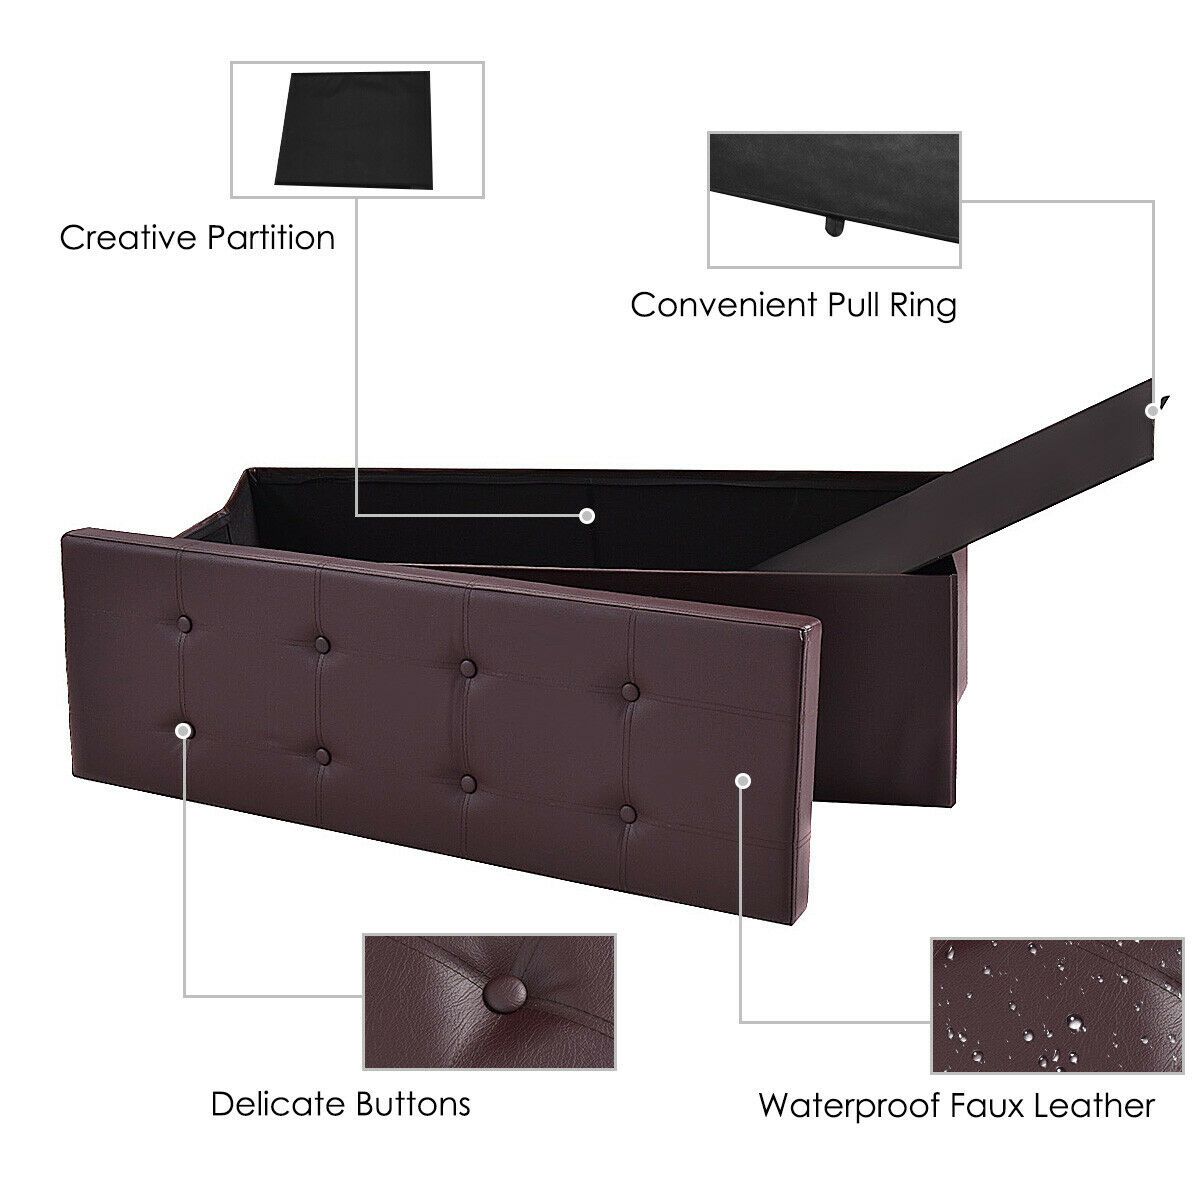 Folding Storage Ottoman Bench with Lid for Living Room